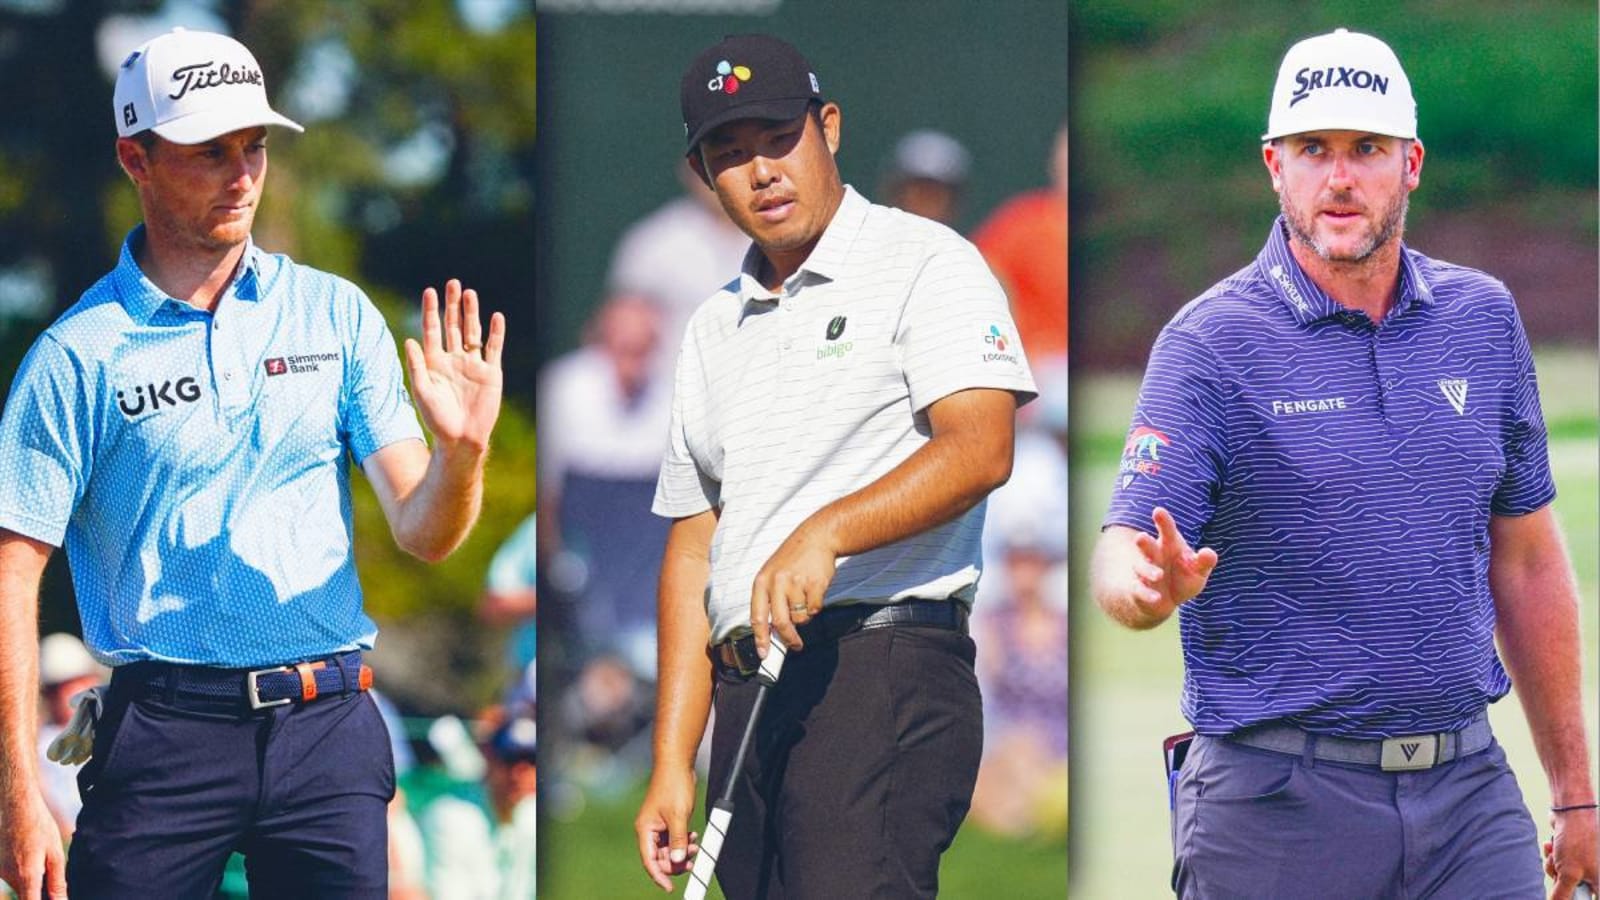 Golf best bets: 3 props for the PGA Championship